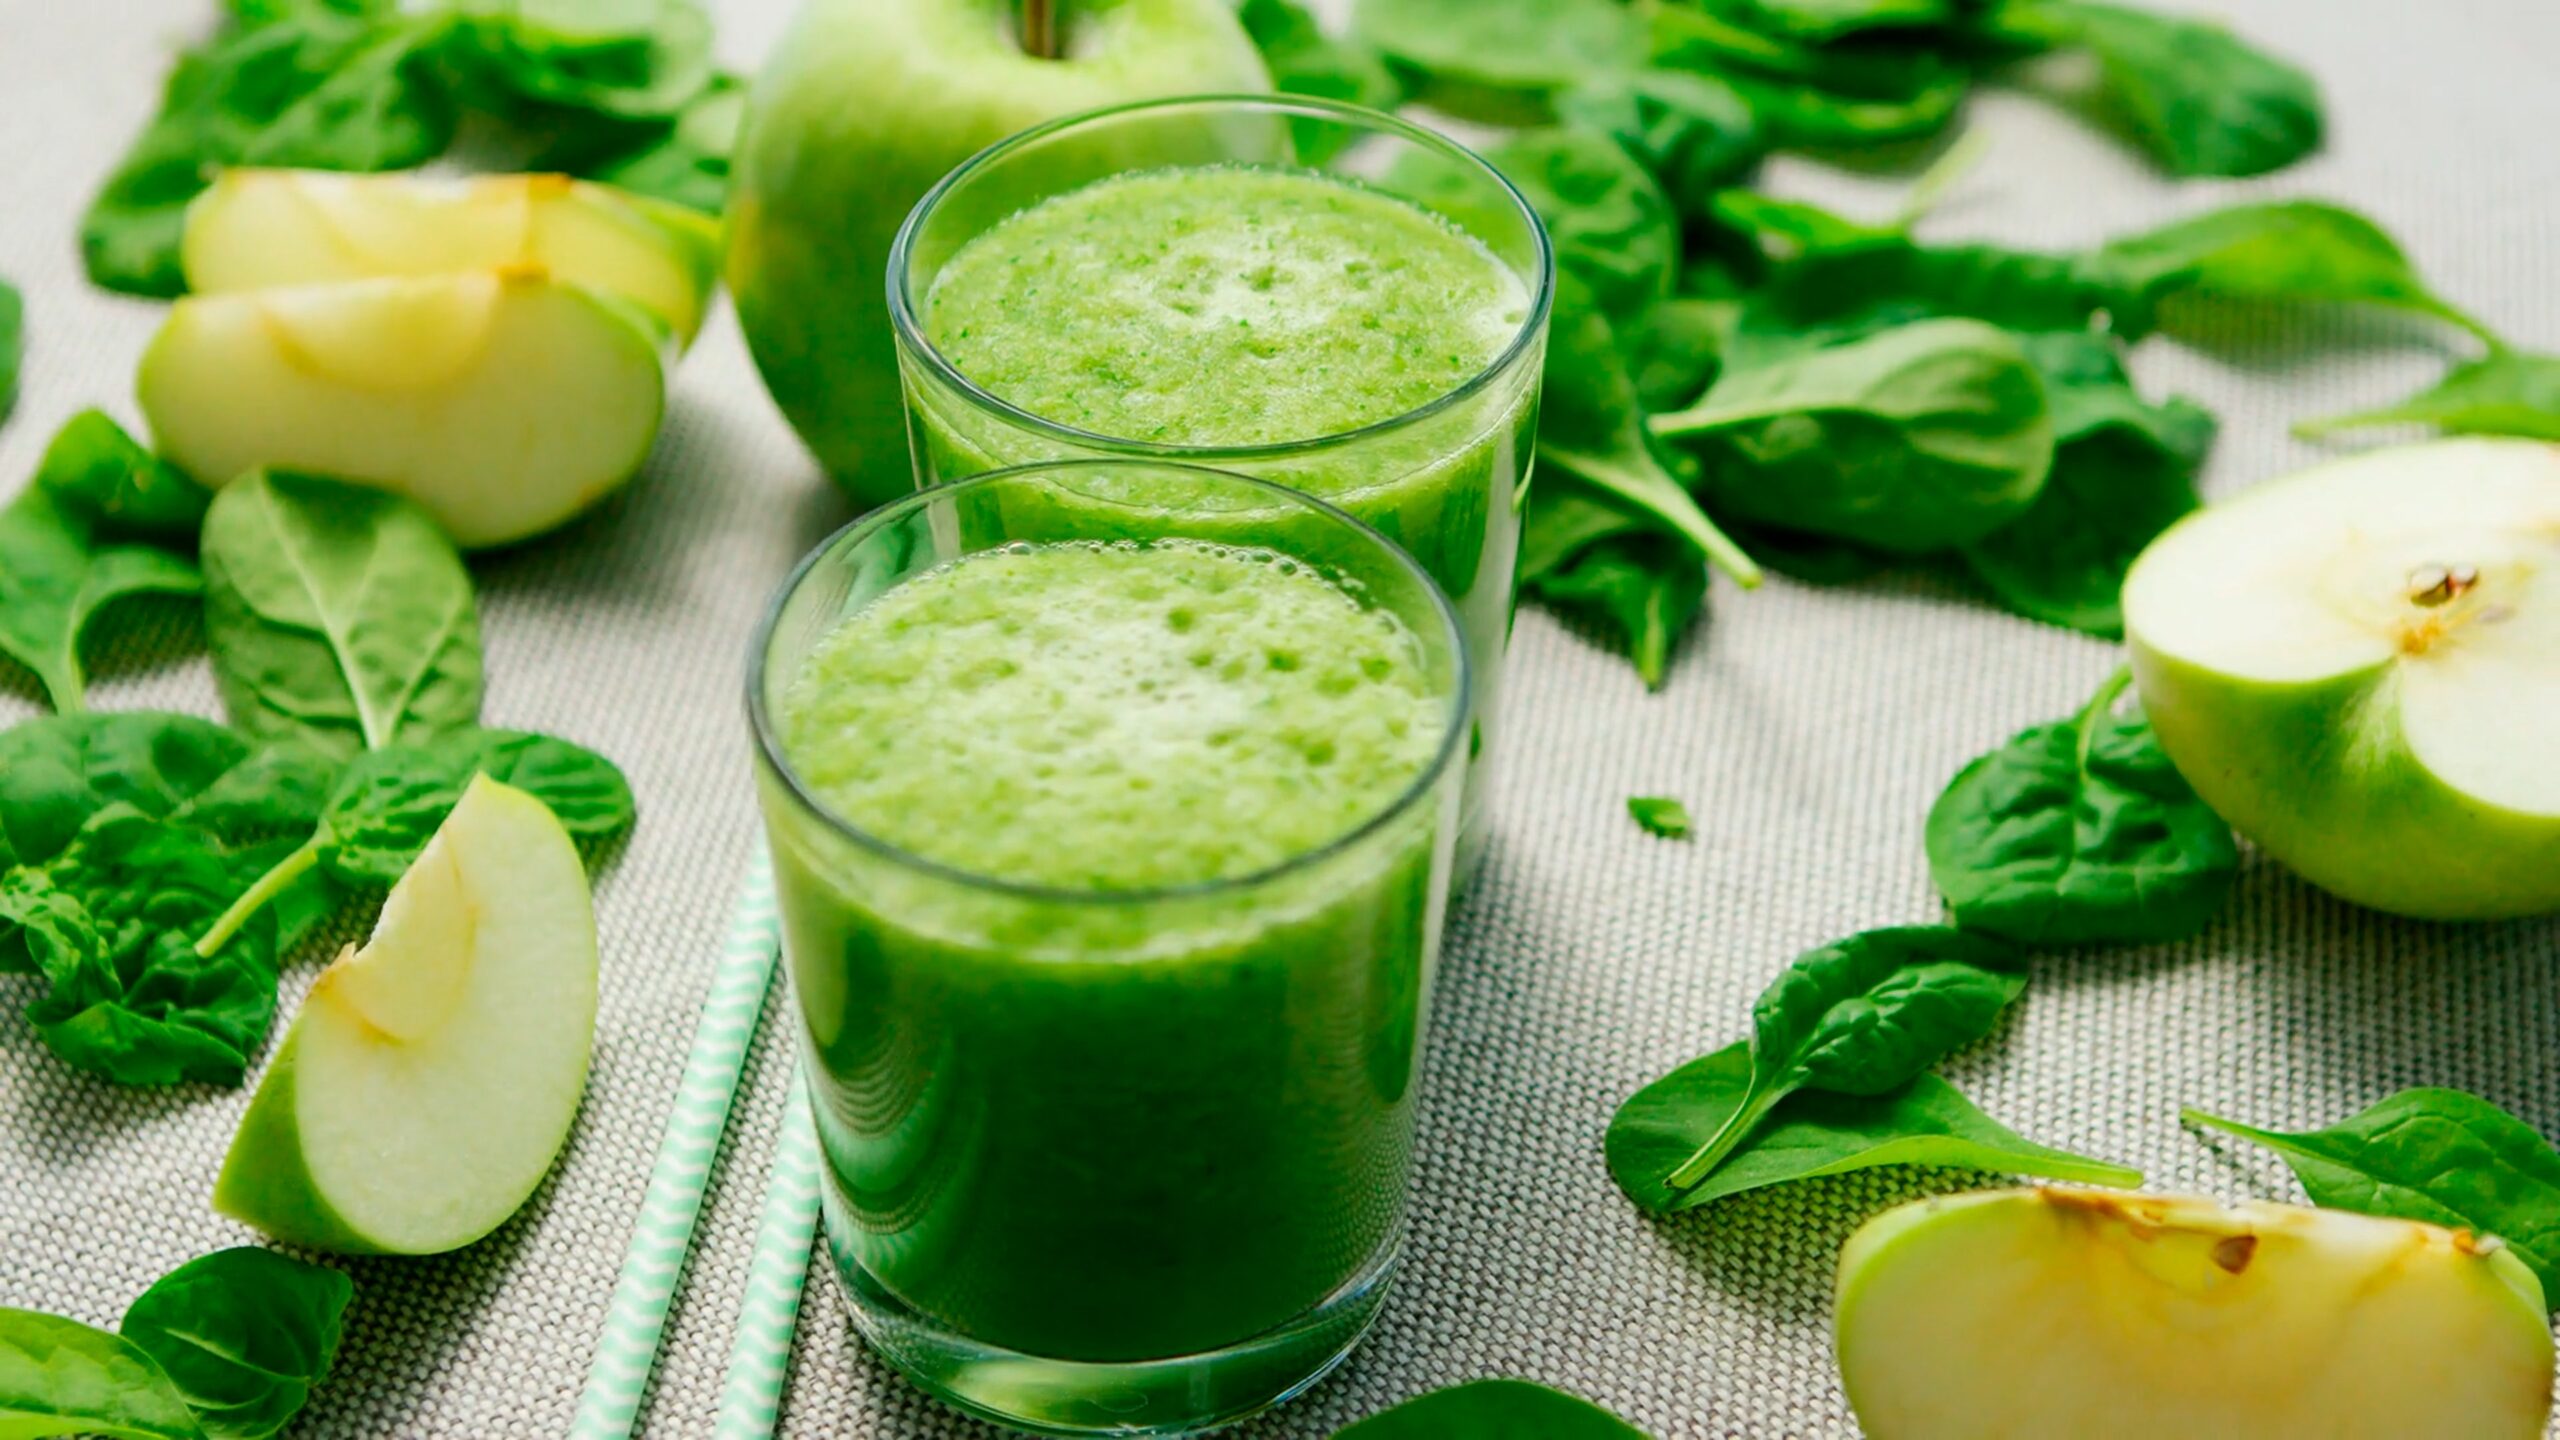 green juices for a juice fast